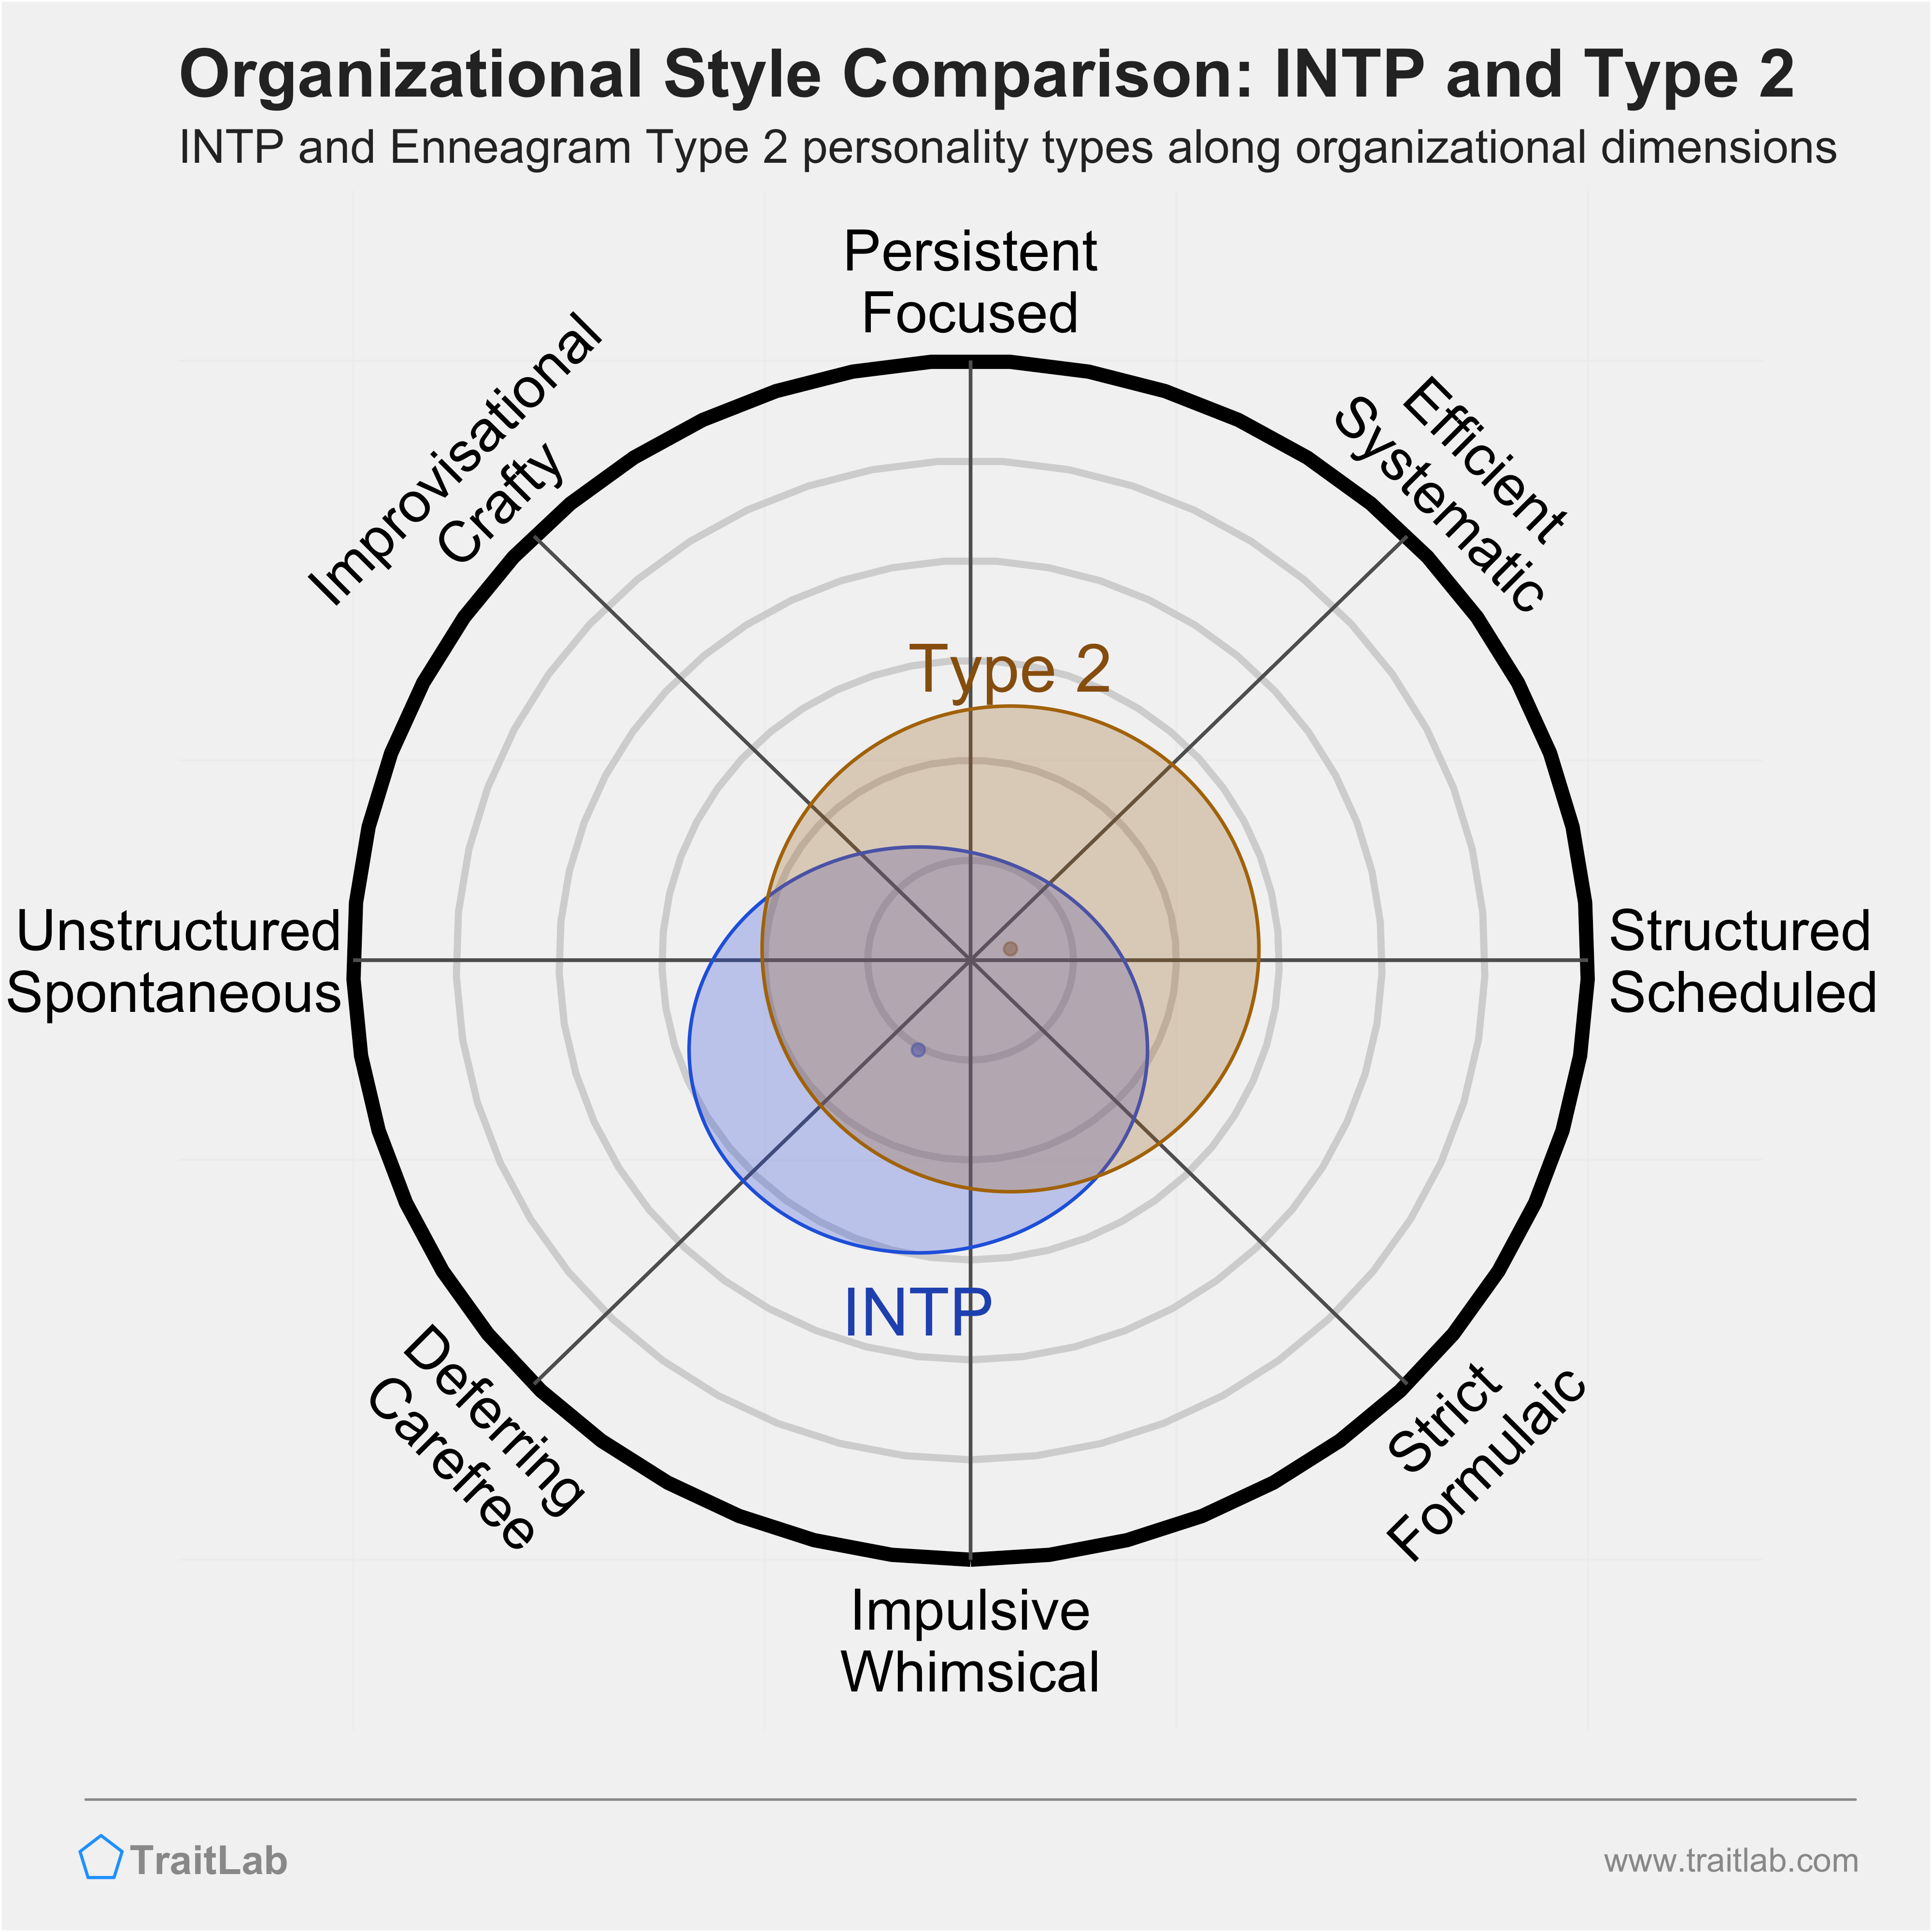 INTP and Type 2 comparison across organizational dimensions